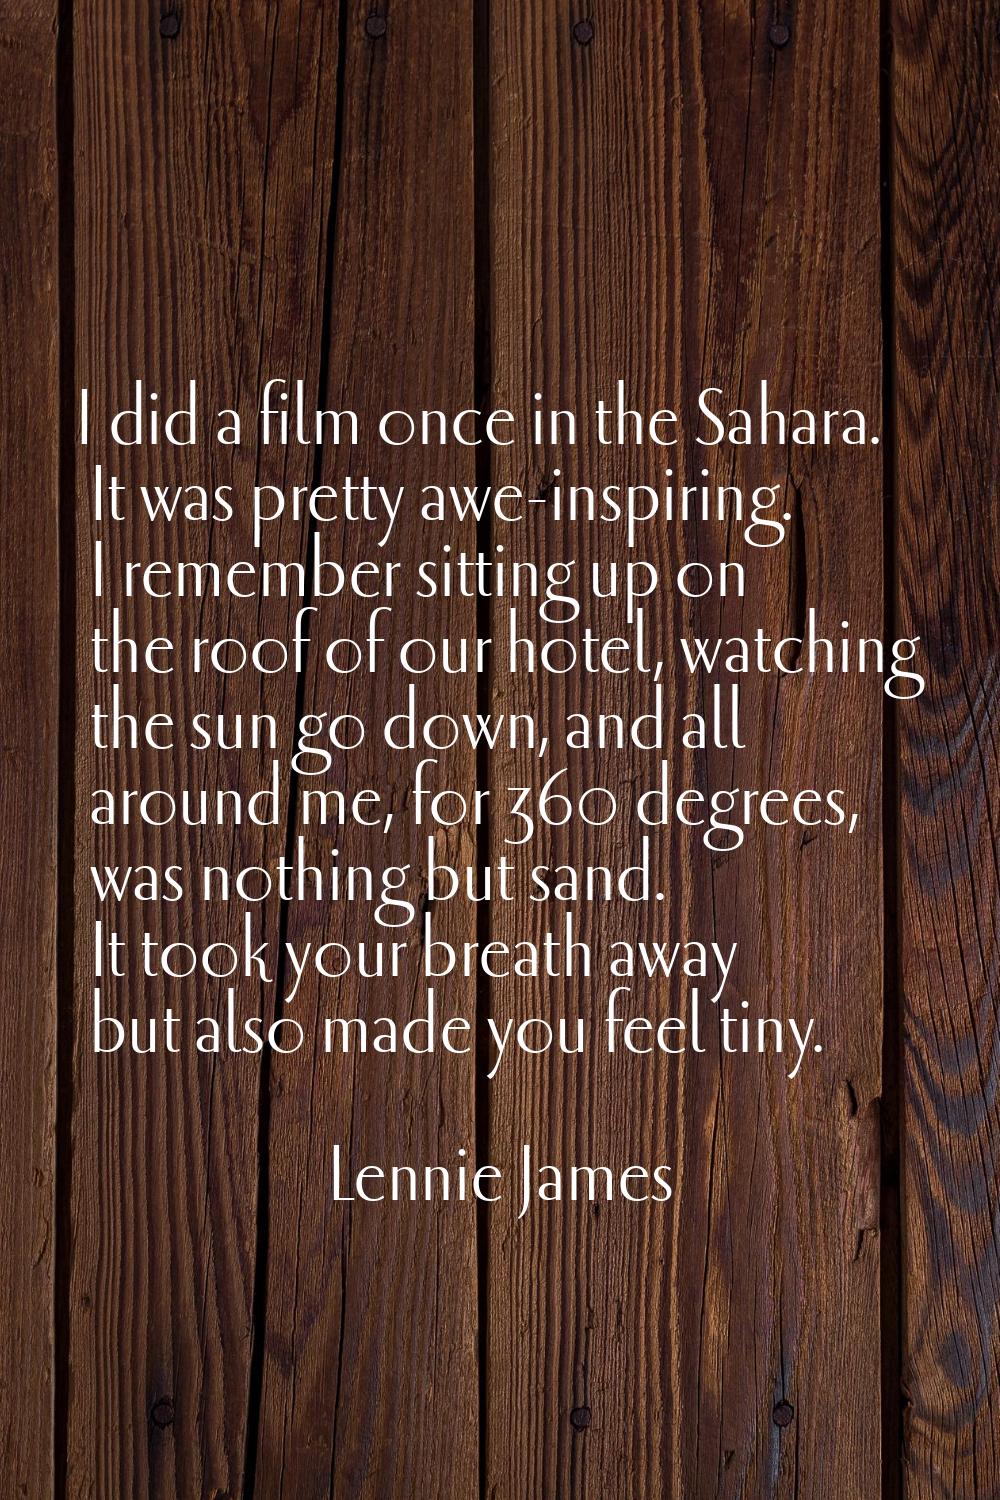 I did a film once in the Sahara. It was pretty awe-inspiring. I remember sitting up on the roof of 